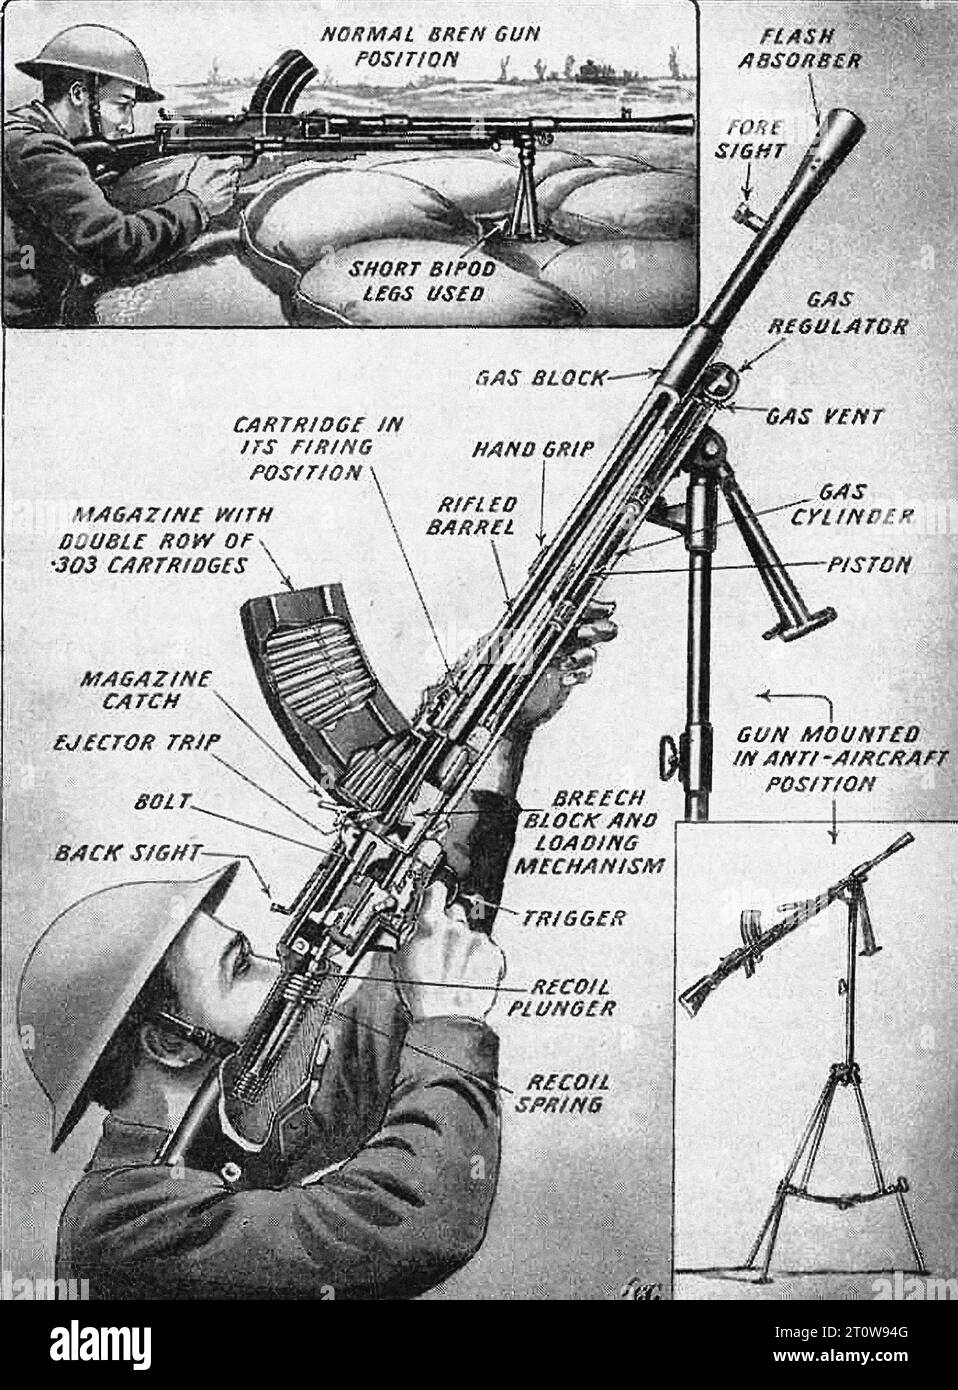 Illustrated Armament Description, British Newspaper - United Kingdom, Second World War : The image is a black and white diagram of a Bren gun. The diagram is labeled with the different parts of the gun, such as the “Normal Bren Gun Position”, “Fore Sight”, “Gas Block”, “Gas Regulator”, “Magazine Catch”, “Rifle Barrel”, “Gun Mounted in Anti-Aircraft Position”, “Recoil Spring”, “Recoil Mechanism”, “Trigger”, “Back Sight”, “Ejector Trip”, “Double Row of Magazines”, “Cartridge in Chamber”, “Legs Used”, “Flash Hider”, “Gas Vent”, “Hand Grip”, “Gun Position”, “Breech Block”, “Bolt Locking Mechanism” Stock Photo